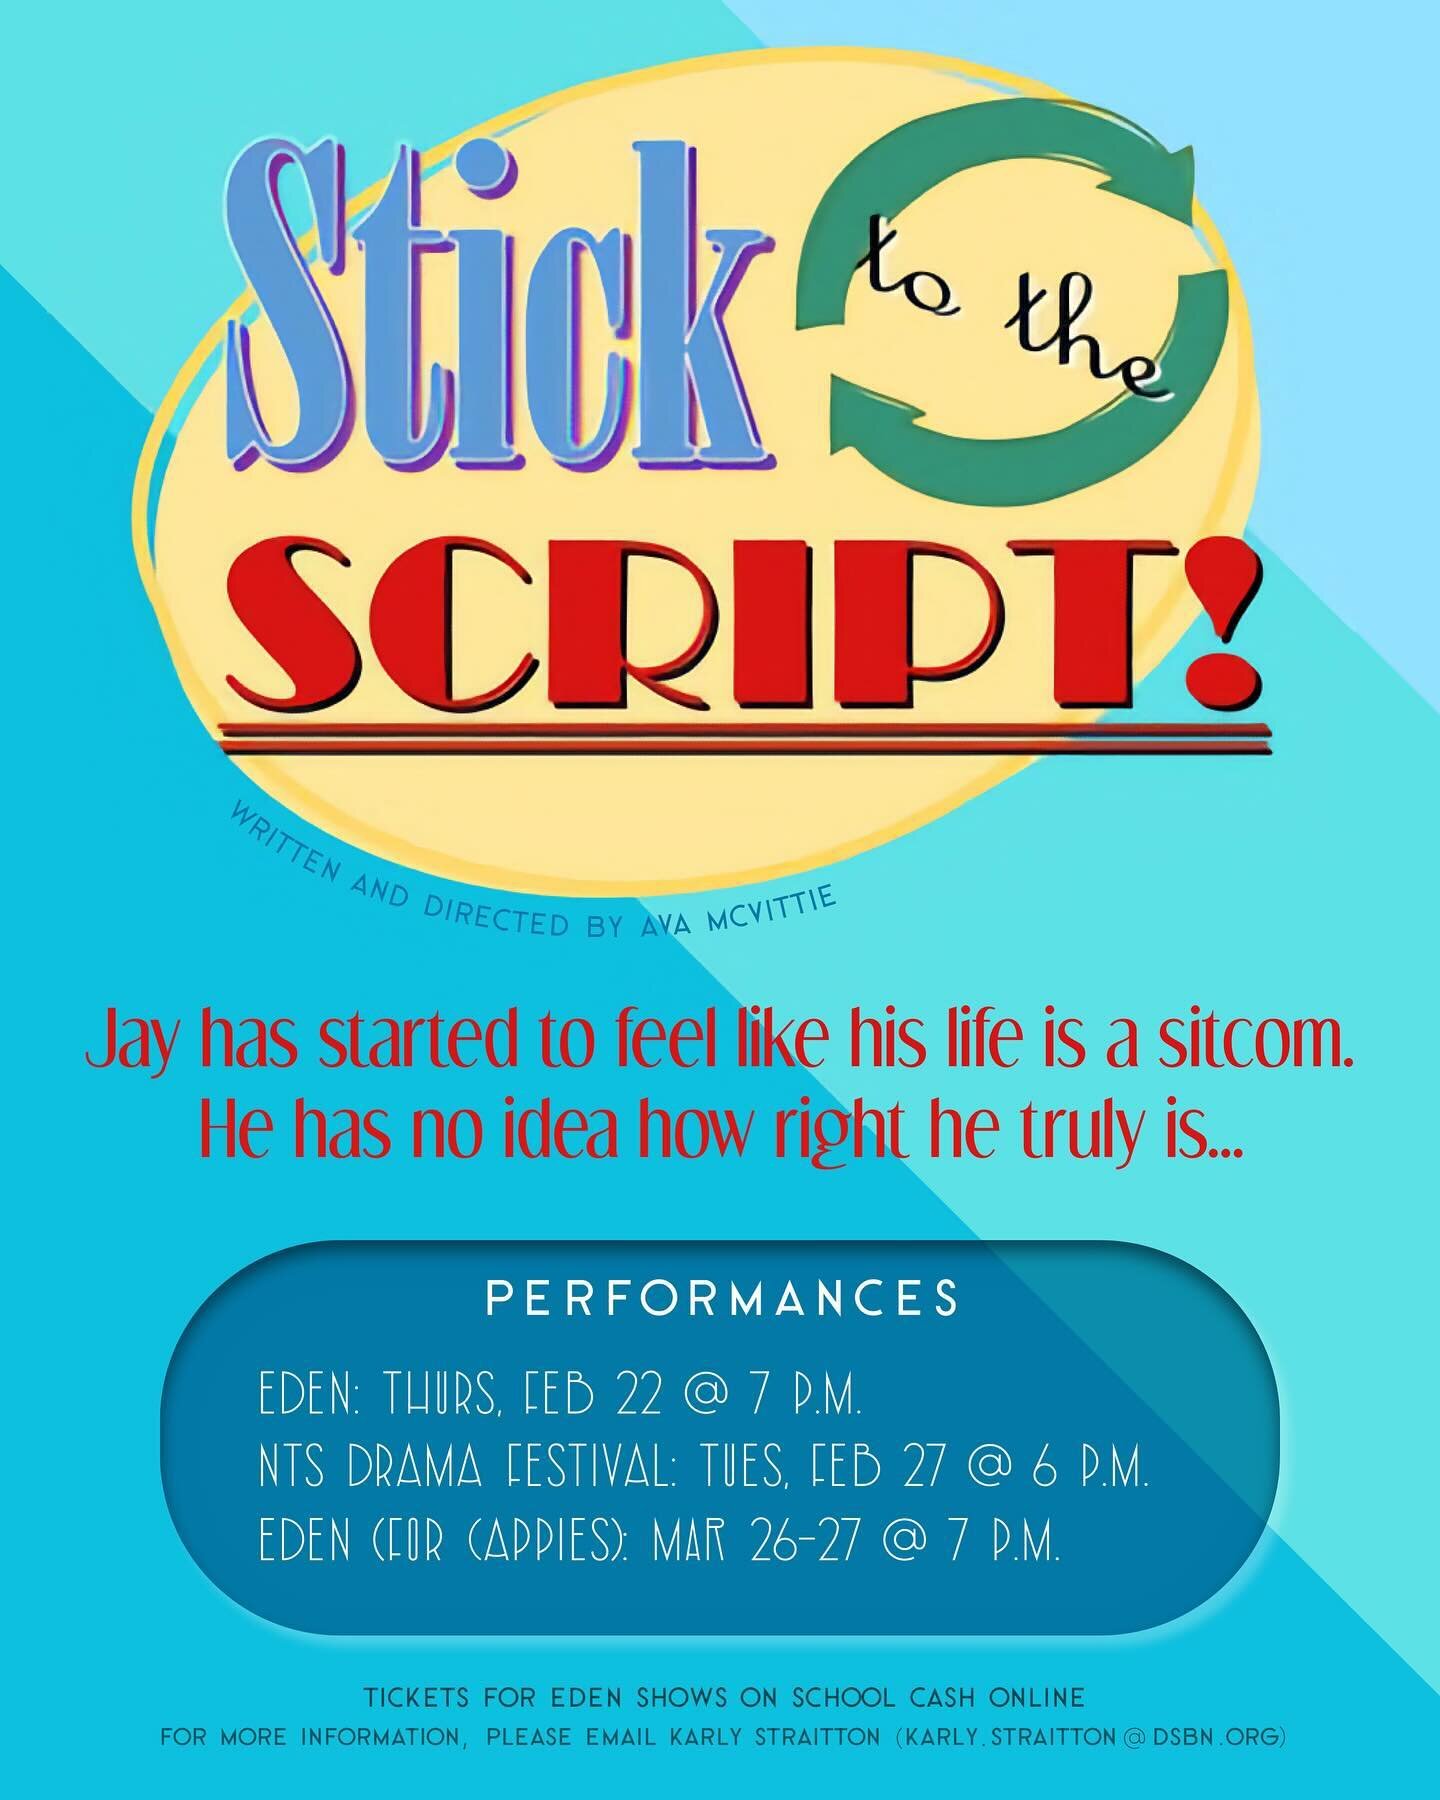 Tickets are now on sale for this year&rsquo;s drama production: &ldquo;Stick to the Script&rdquo;! There is a one-night only special performance on Thursday, February 22nd at 7pm before the play moves on to compete in the National Theatre School Dram